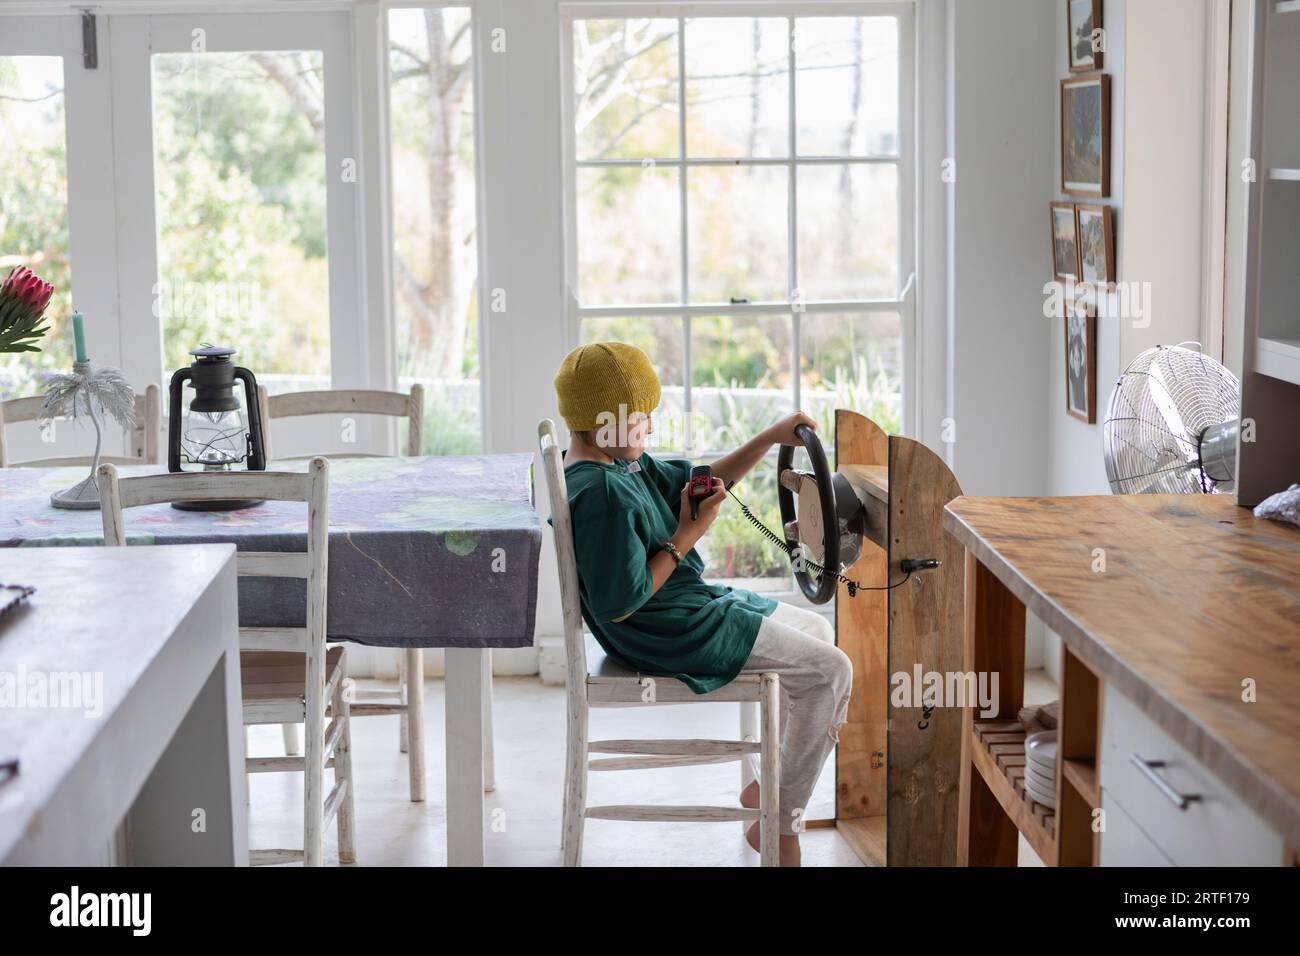 Boy (10-11) pretending to drive homemade steering wheel at home Stock Photo